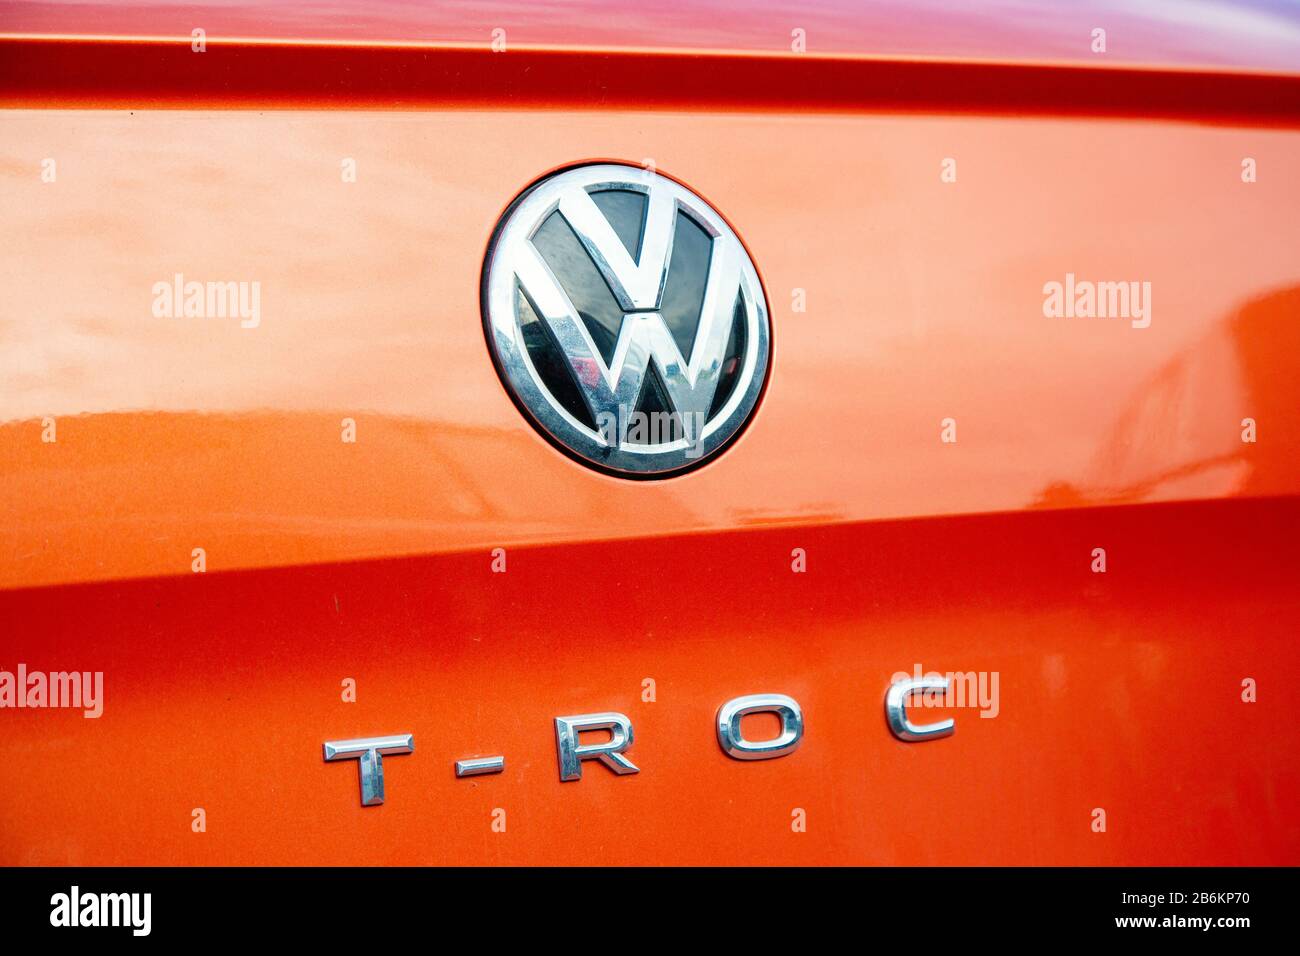 Cognac, France - February 16, 2020:Close-up of the Logo T-Roc placed on the back of orange Volkswagen SUV car Stock Photo